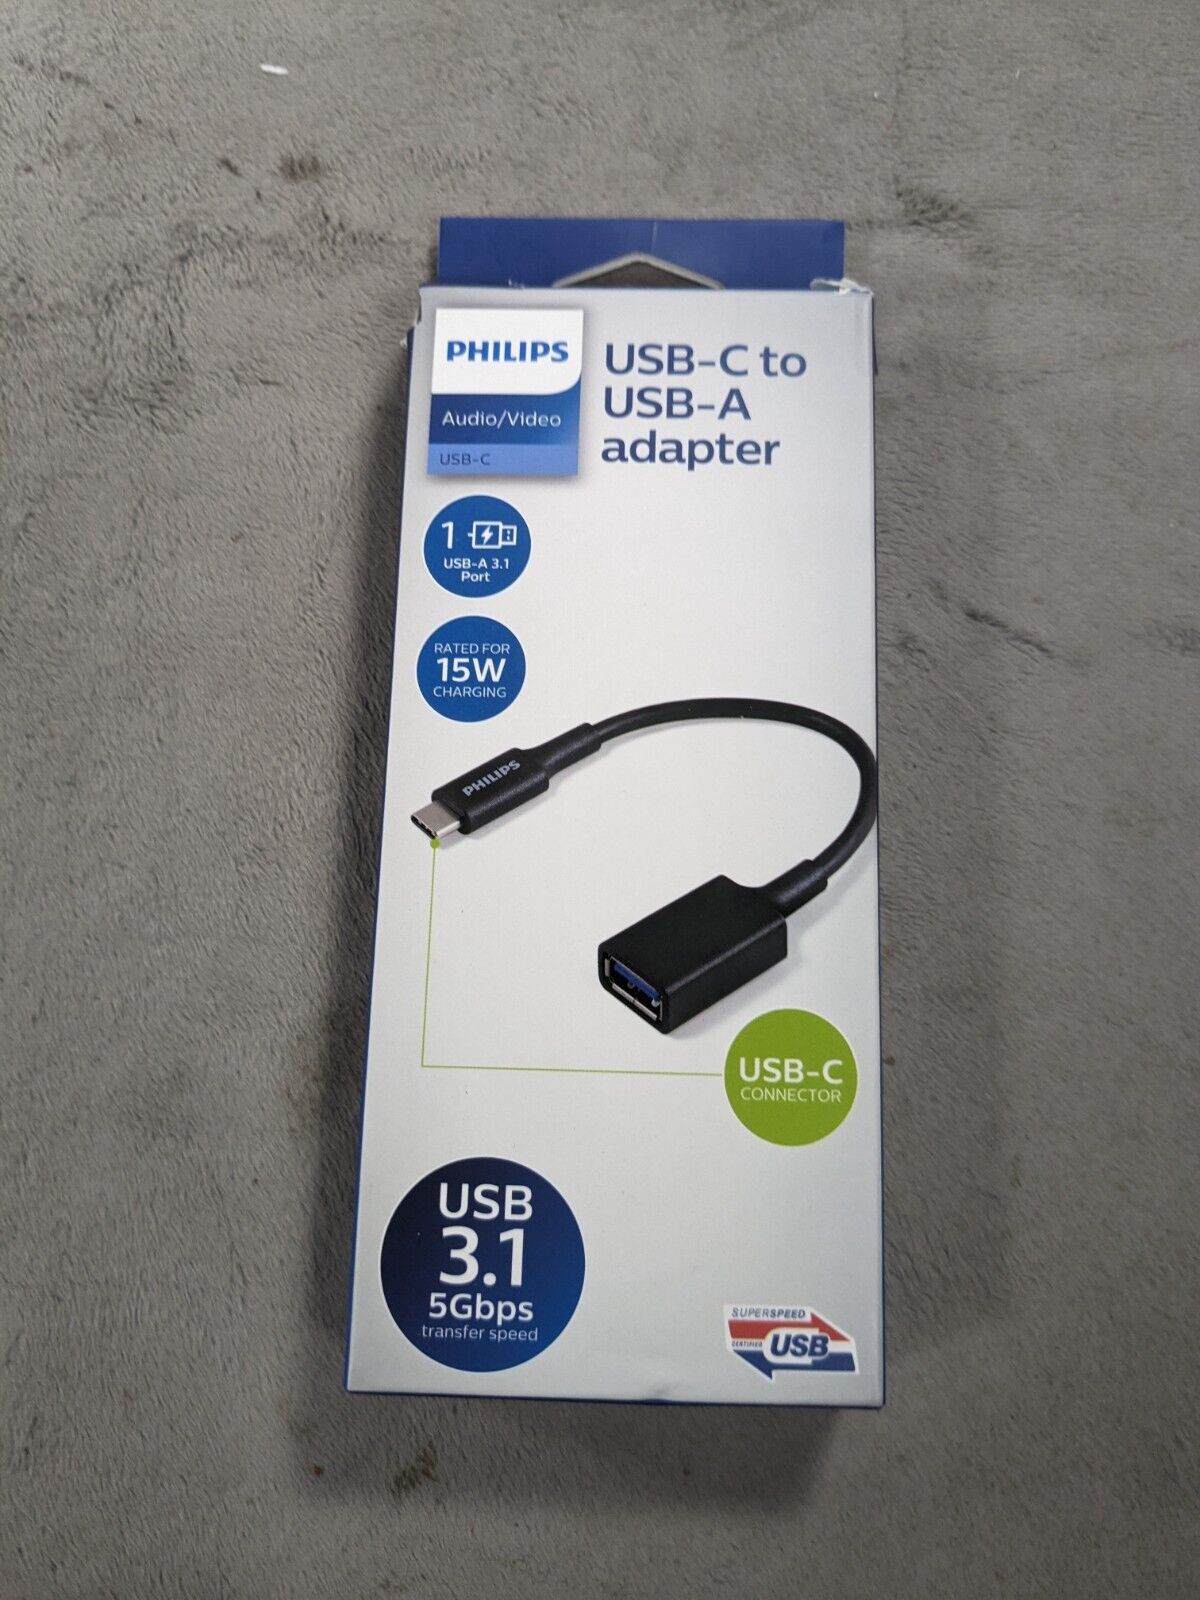 Philips USB-C to USB-A Adapter 15w Charging Rated 5Gbps USB 3.1